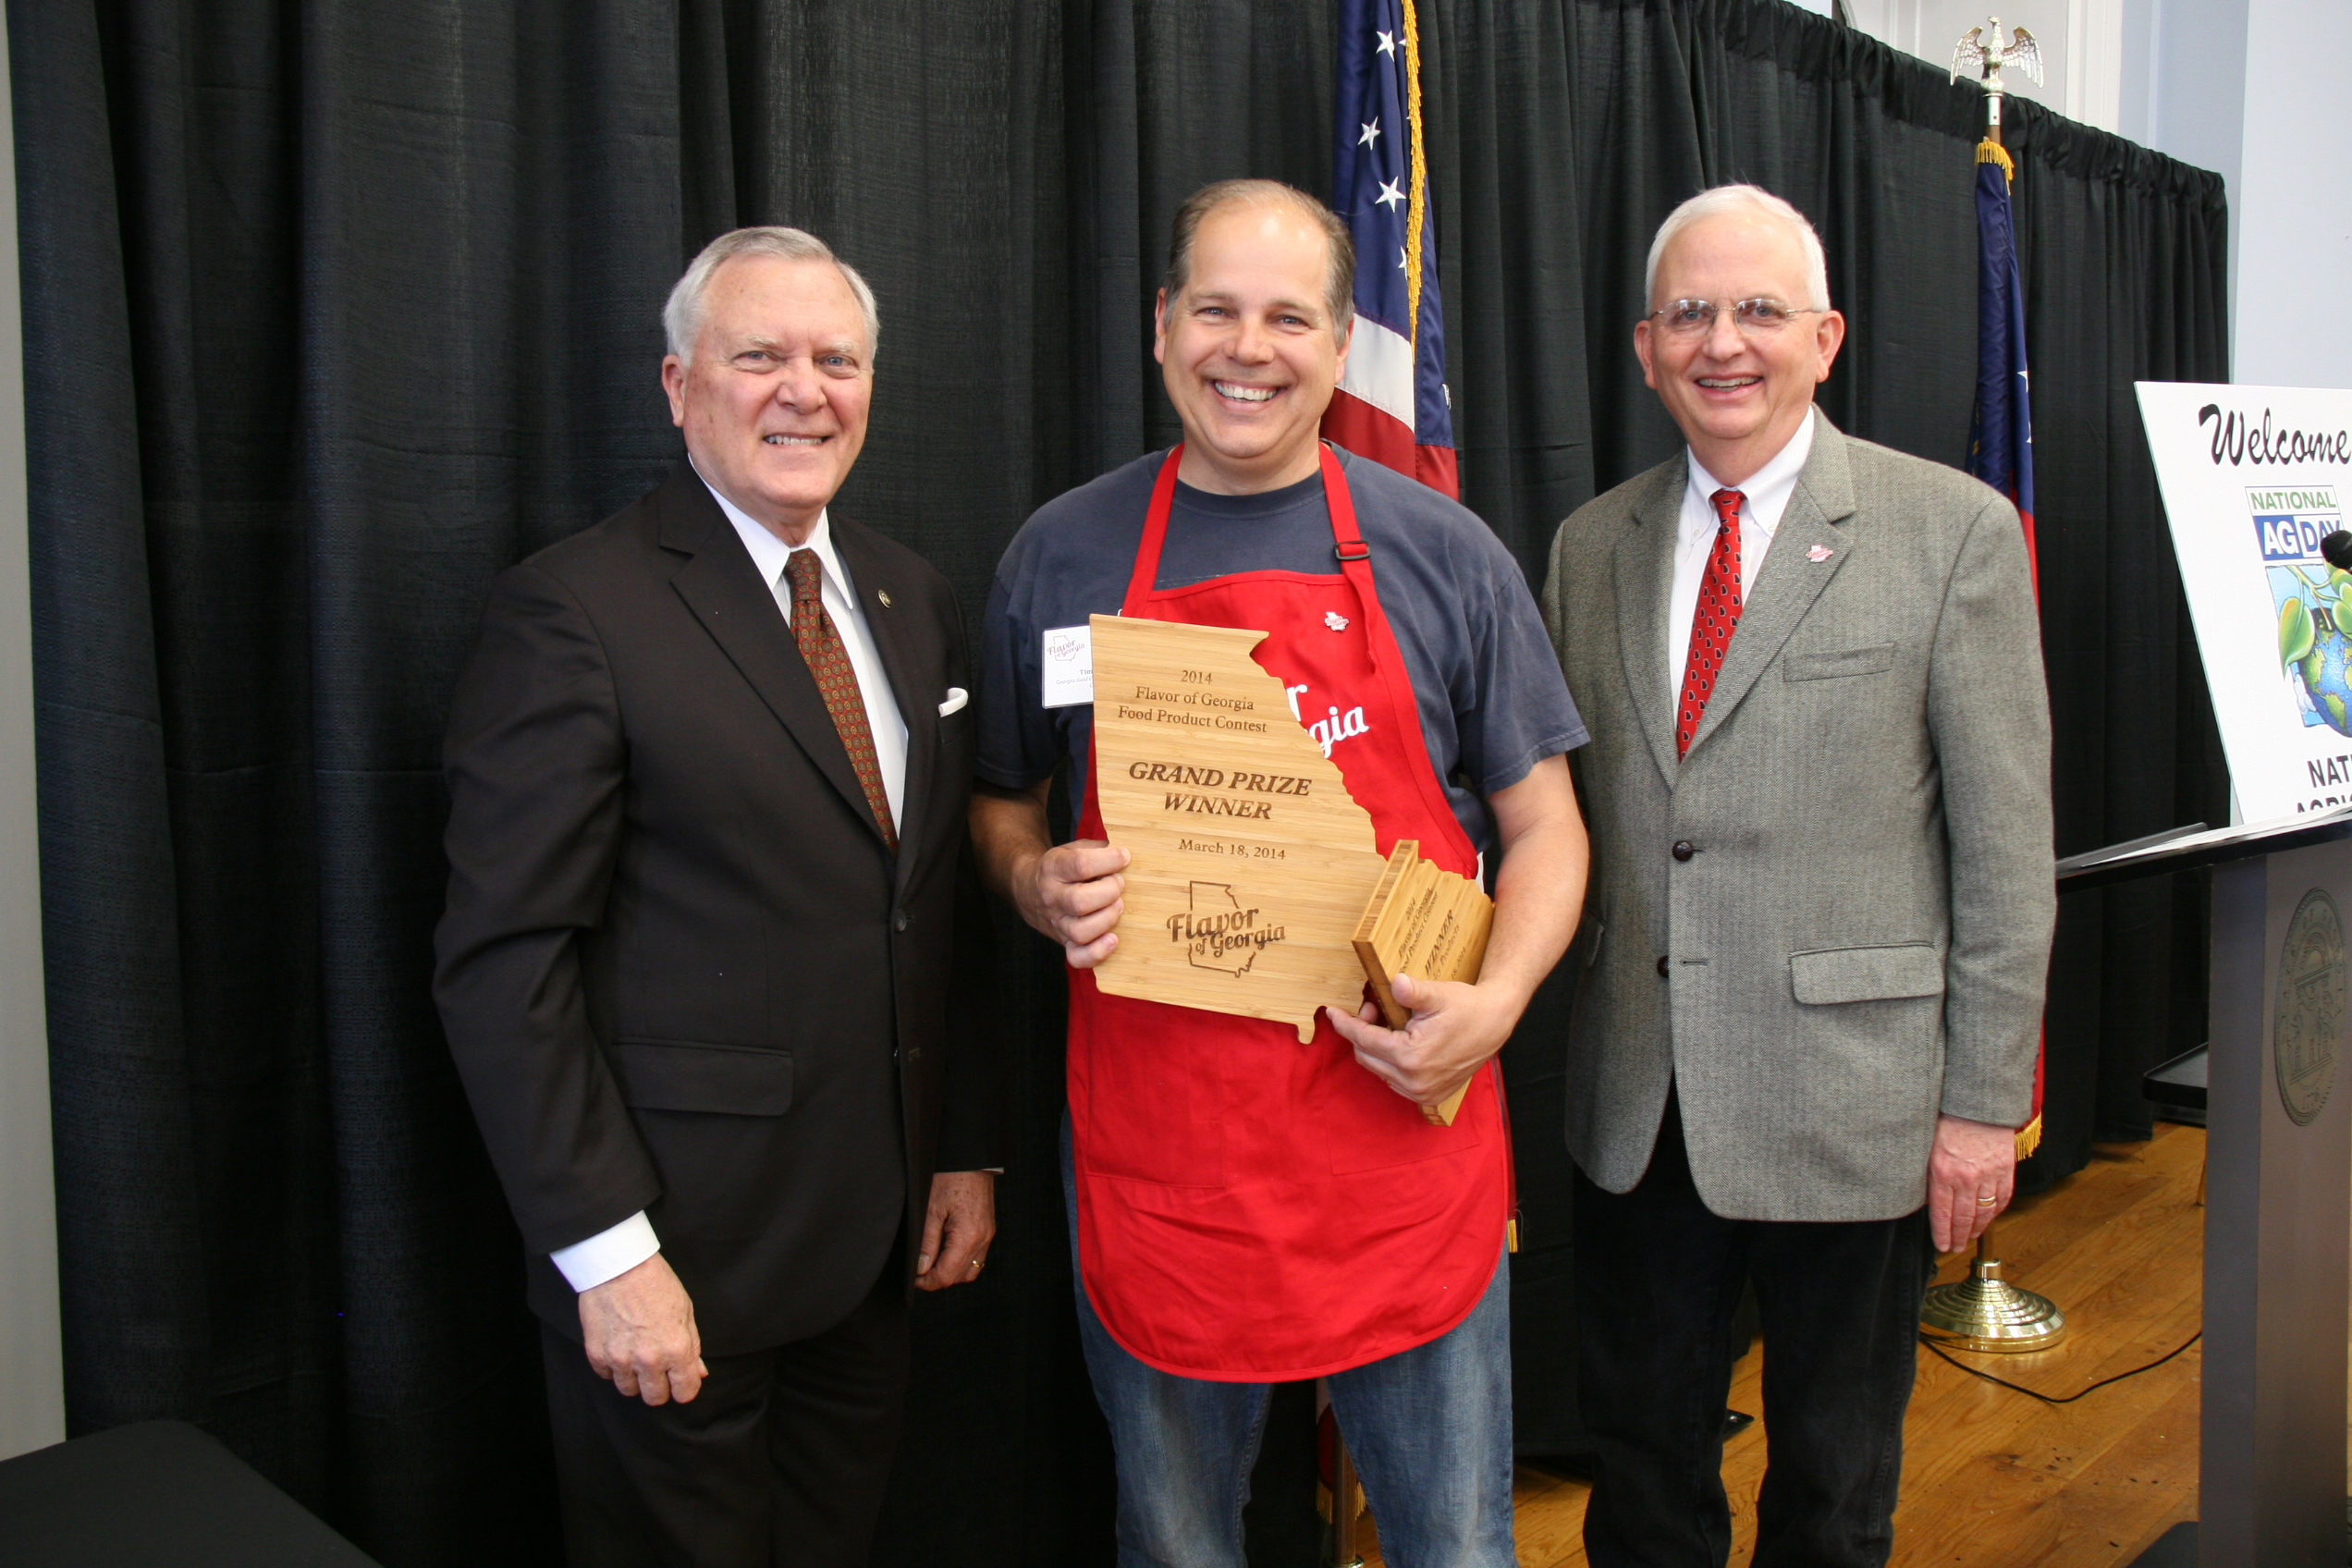 Tim Young, center, receives the Flavor of Georgia grand prize for his Georgia Gold Clothbound Cheddar from Gov. Nathan Deal and Agriculture Commissioner Gary Black on March 18.